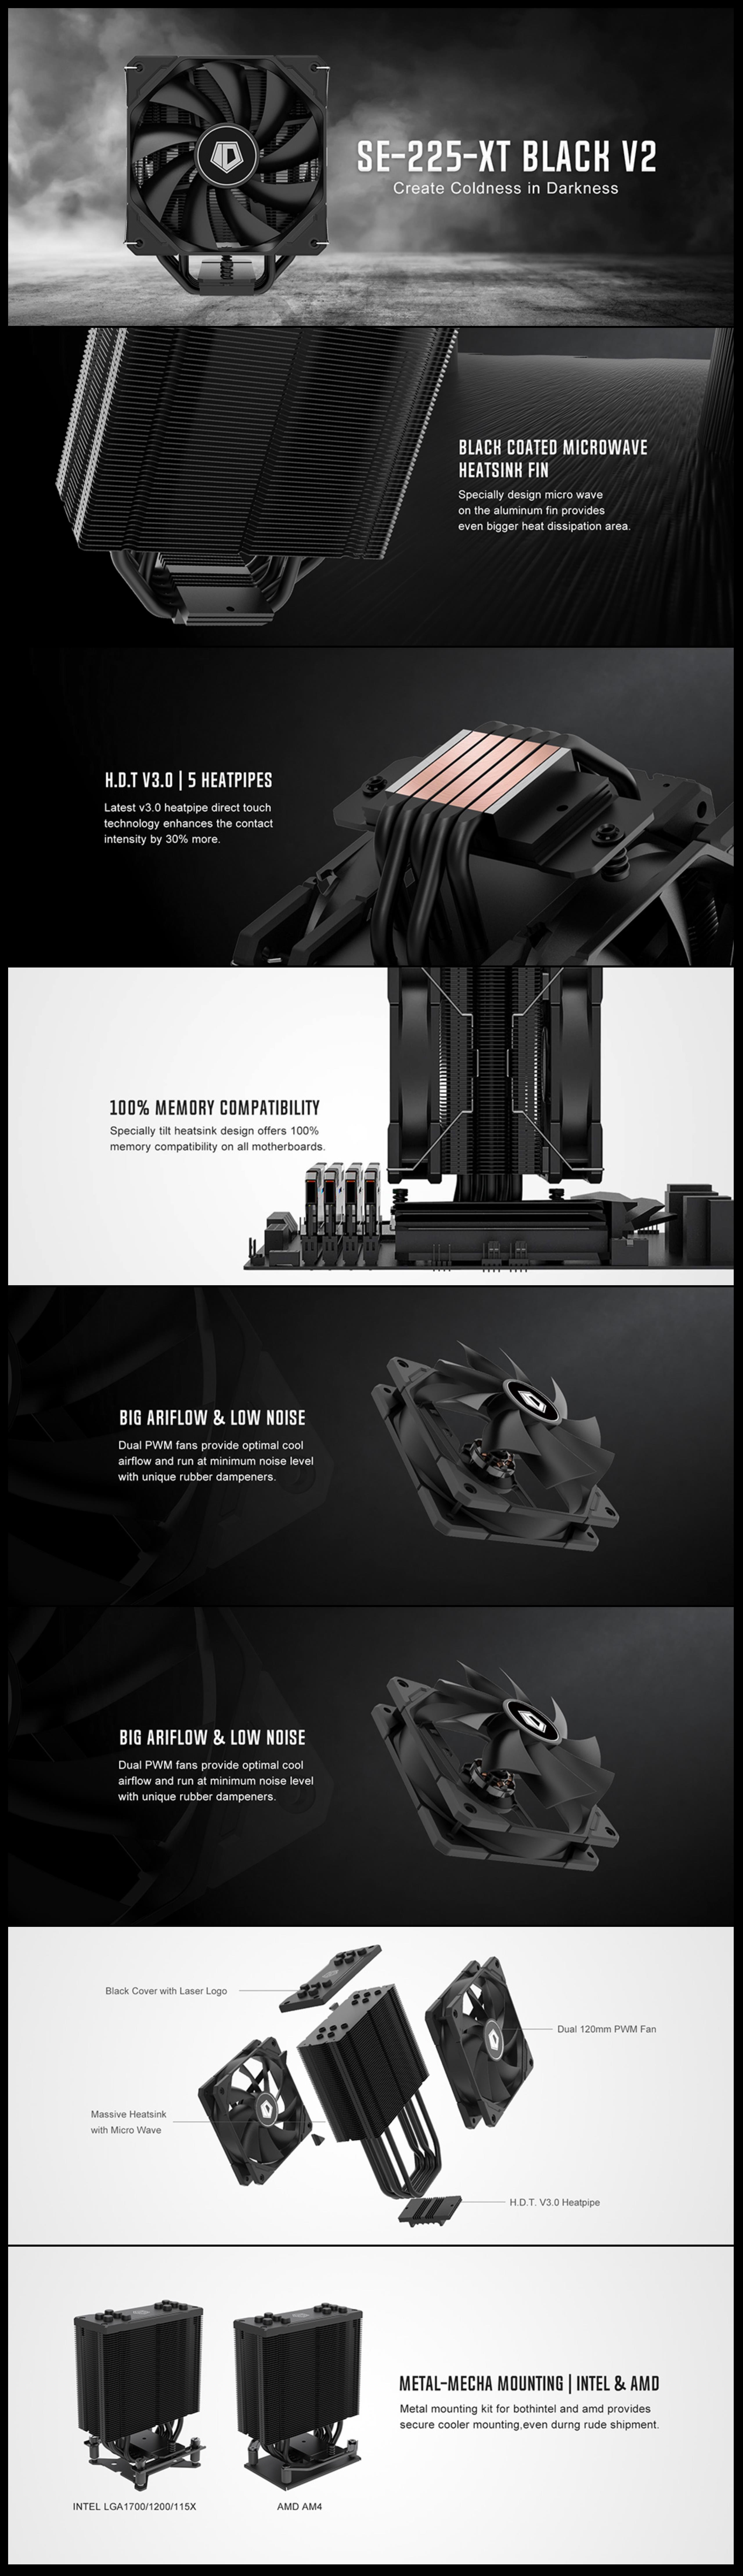 A large marketing image providing additional information about the product ID-COOLING SE-225-XT Black V2 CPU Cooler - Additional alt info not provided